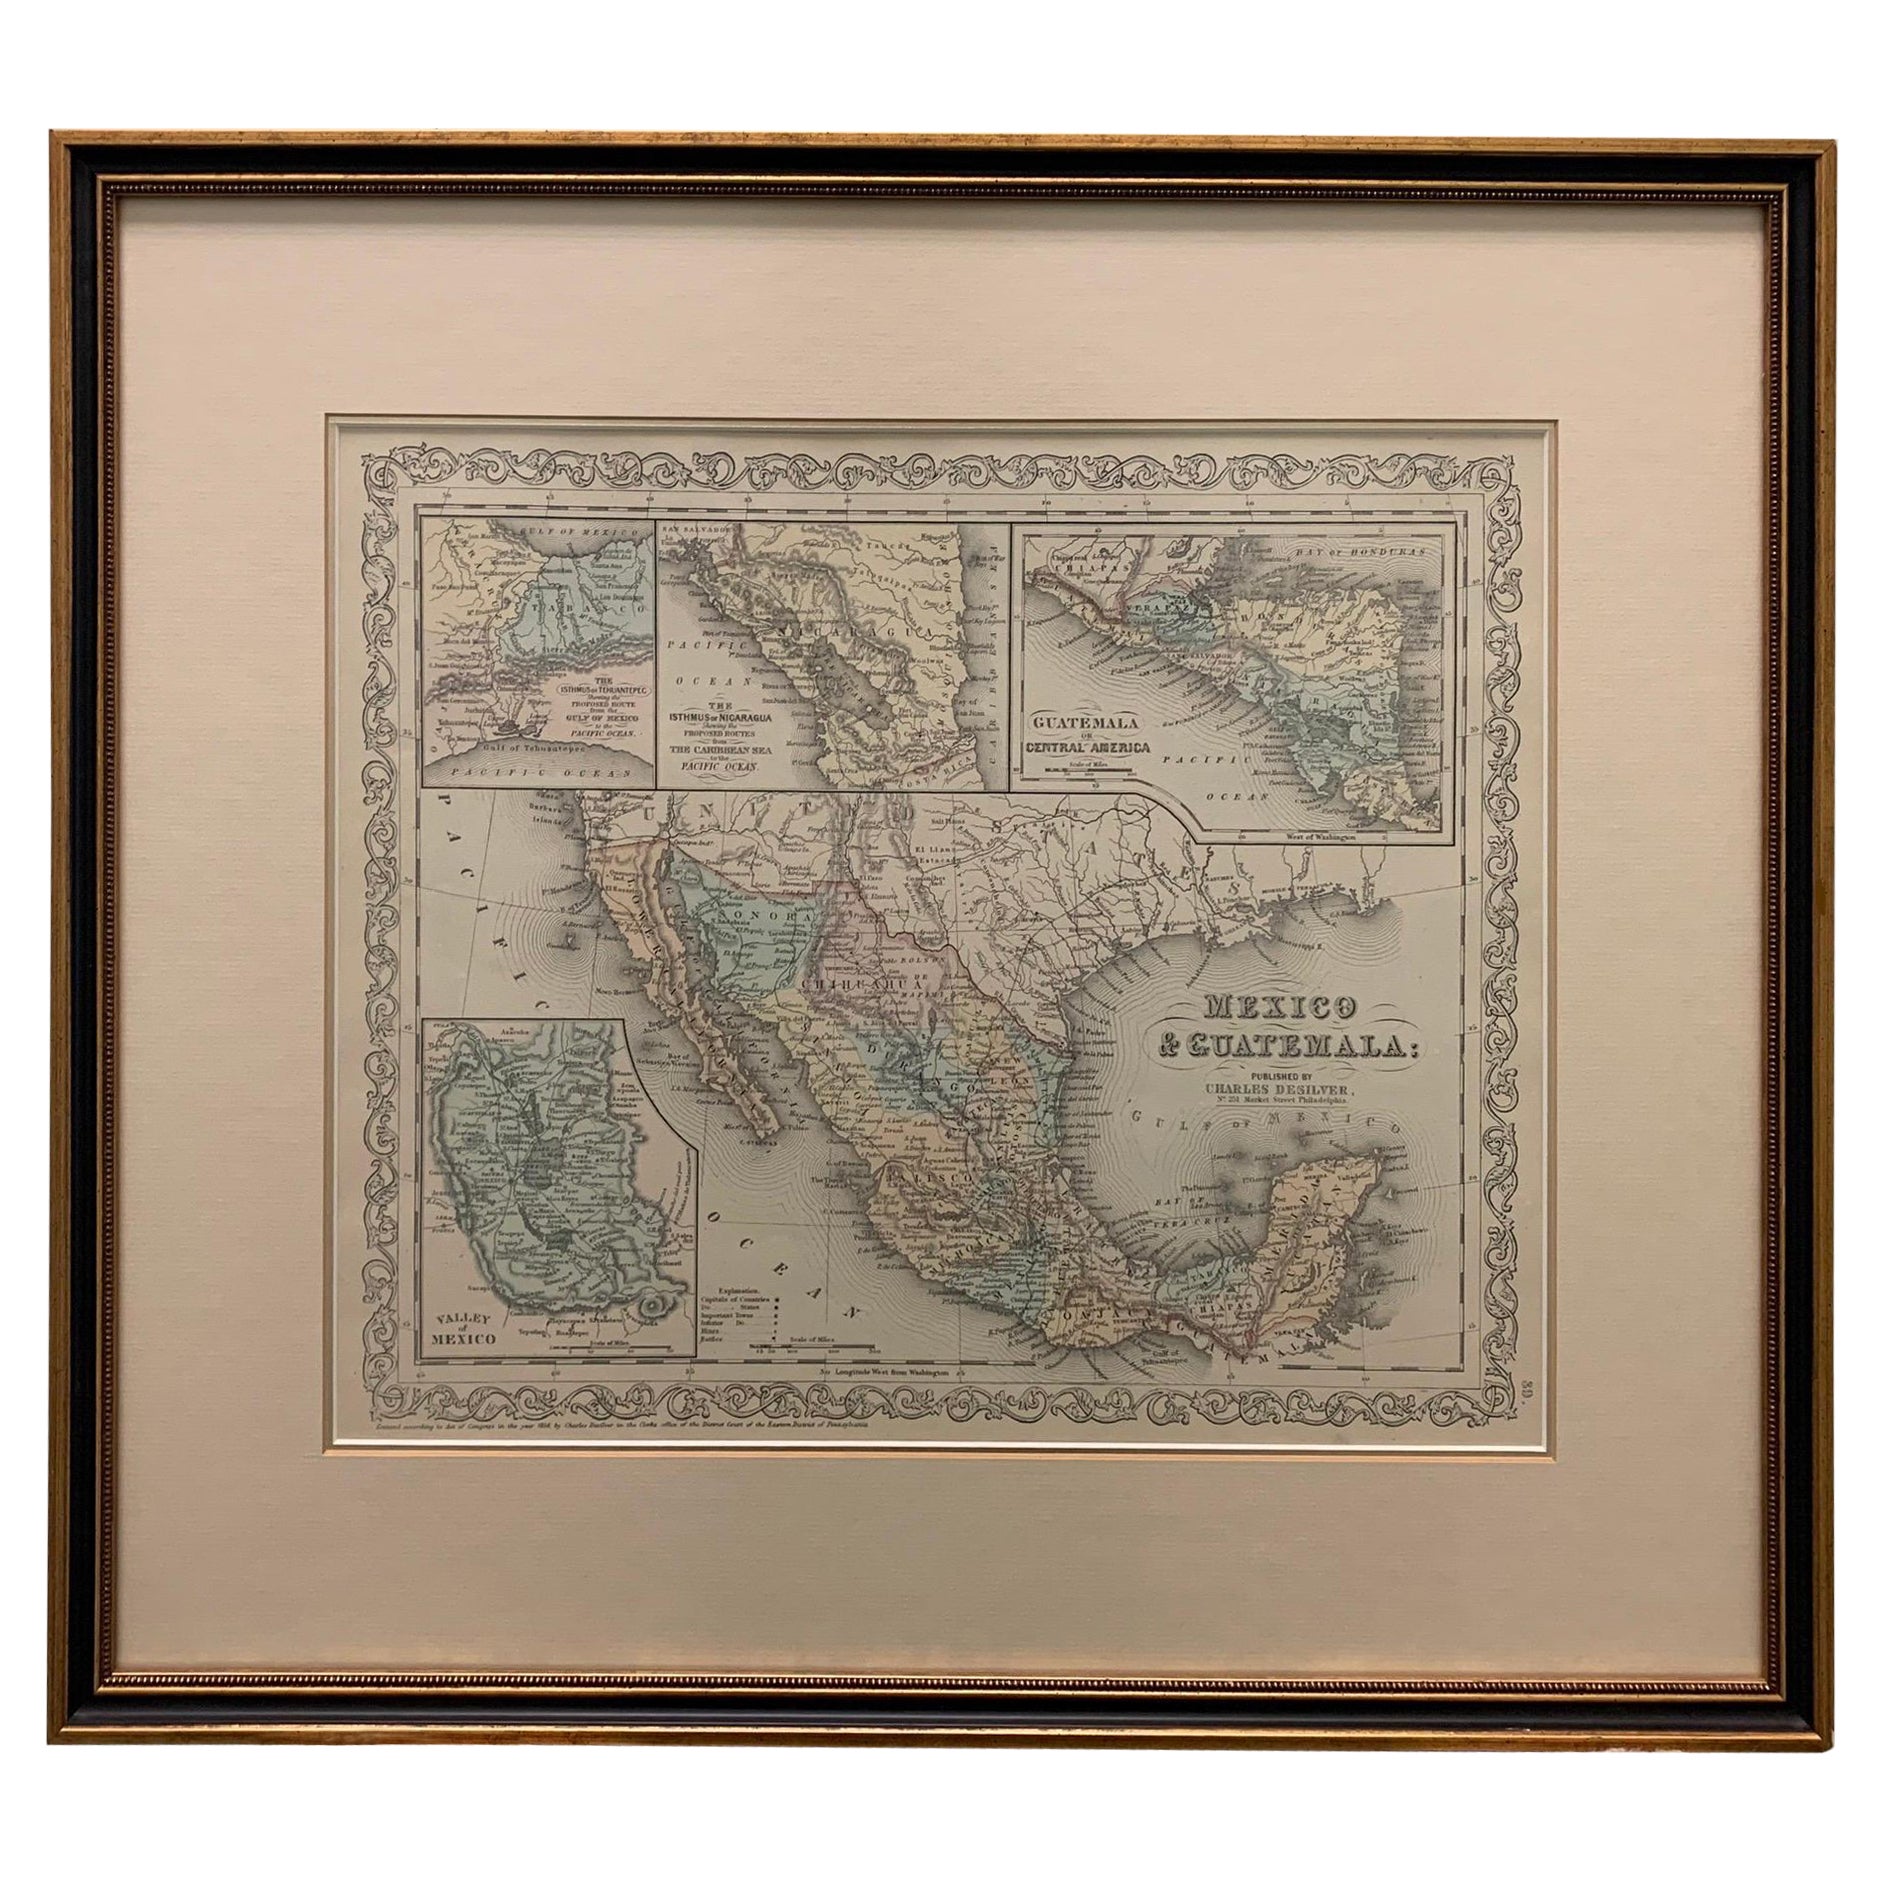 Large 1856 Mexico & Guatemala Framed Map by Charles Desilver For Sale